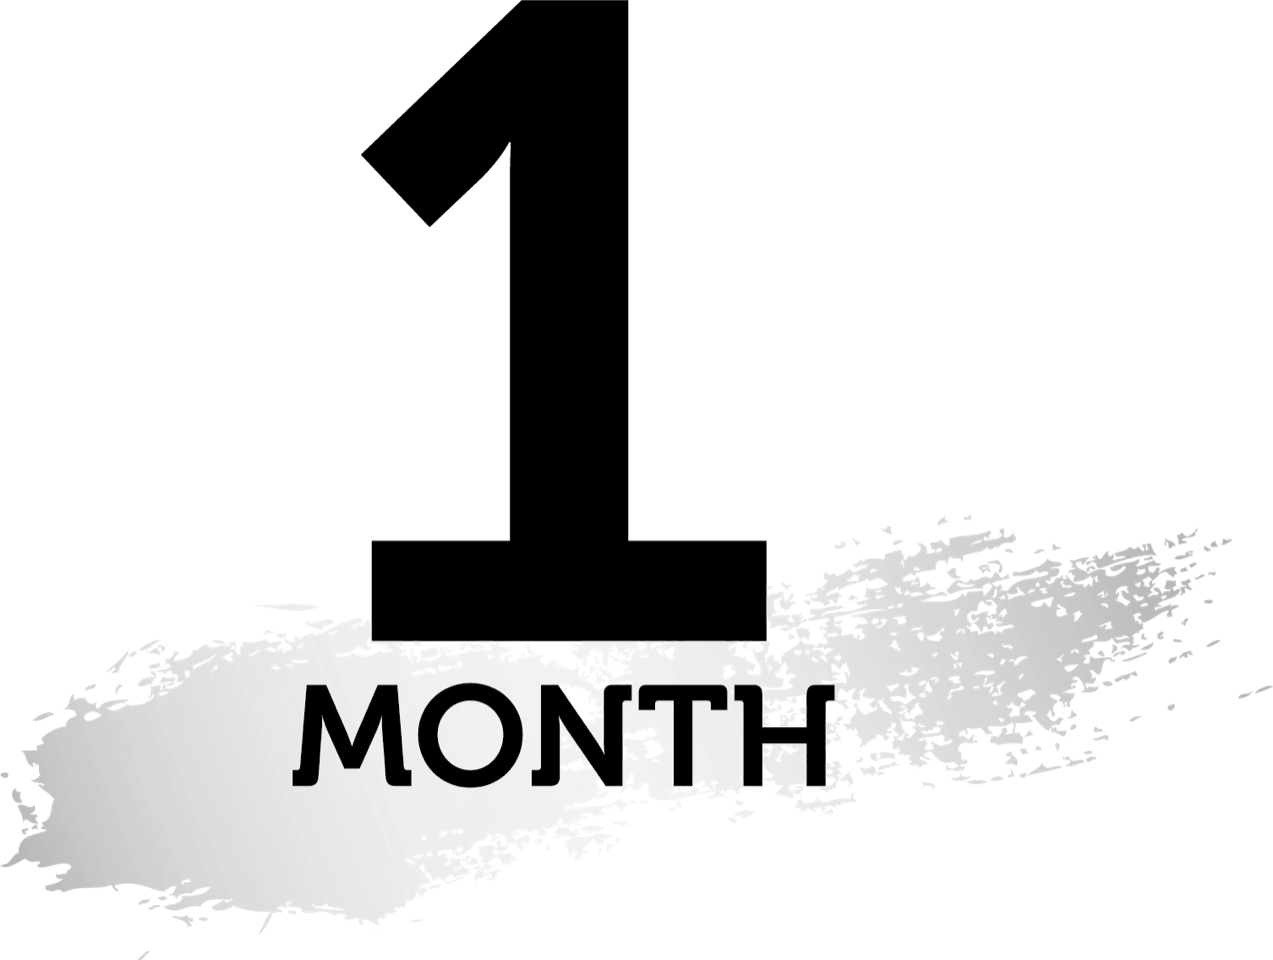 Every month icon